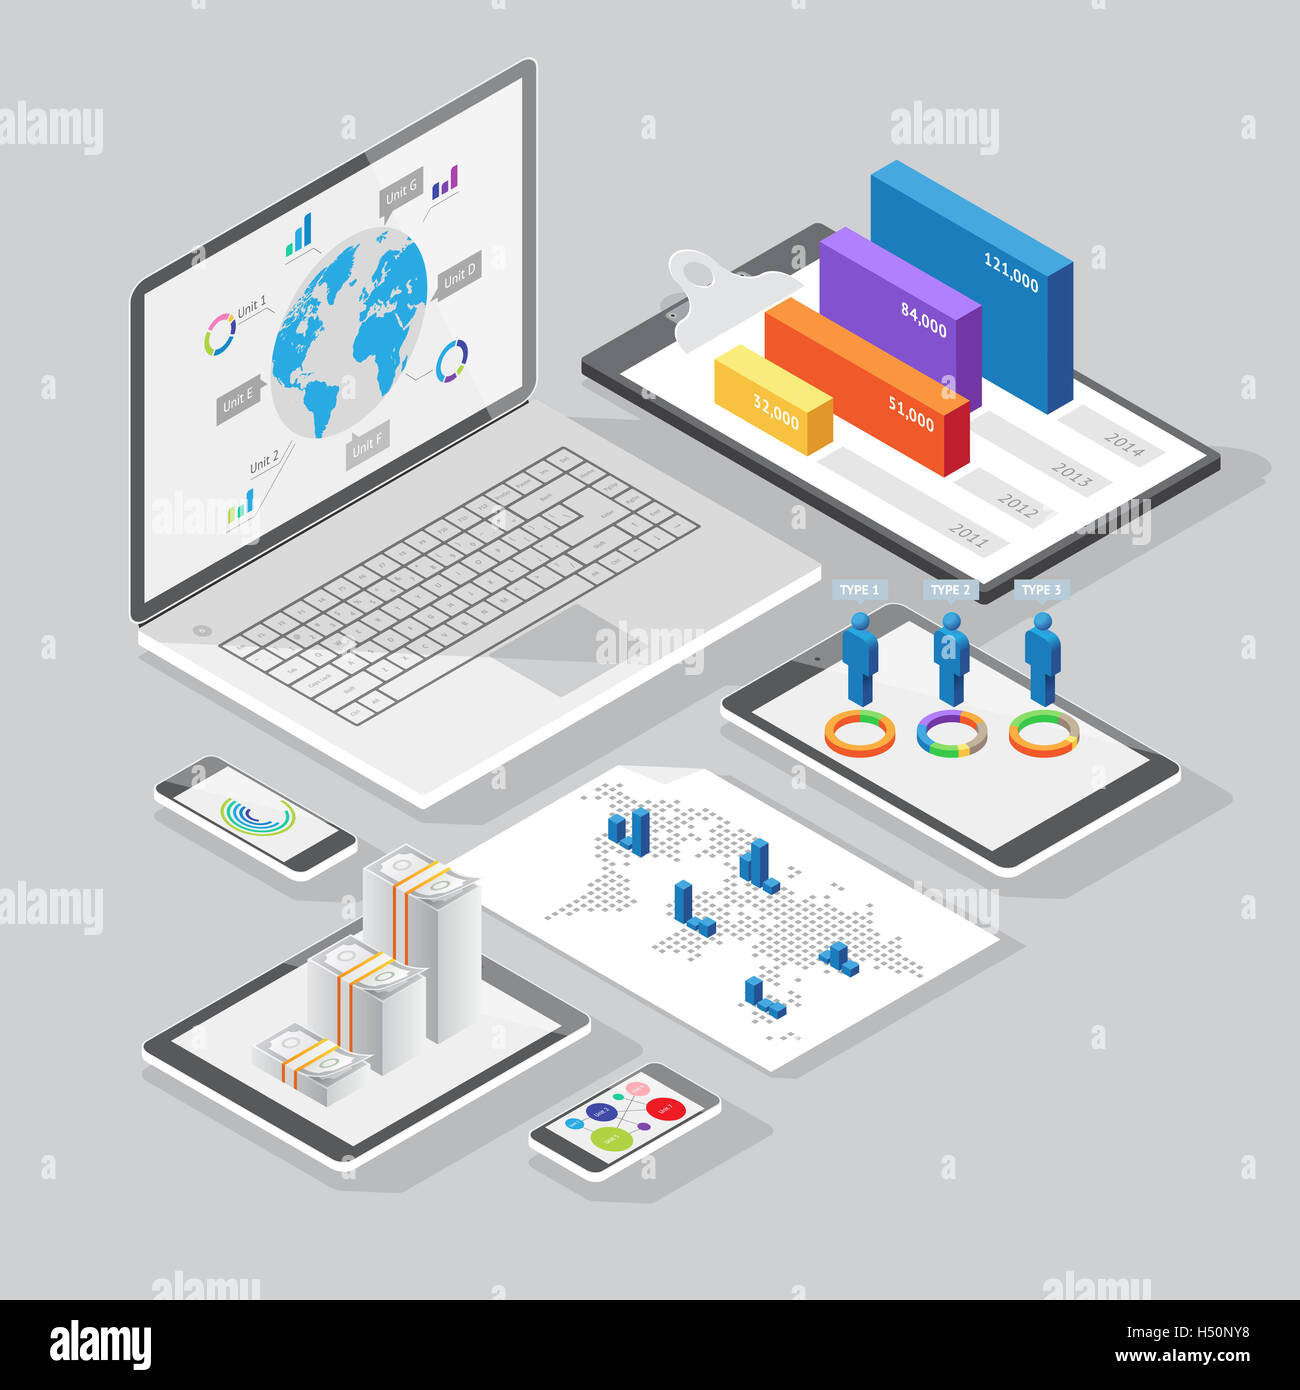 Set of infographics design elements on stationery and computer devices. Isometric style. Stock Photo